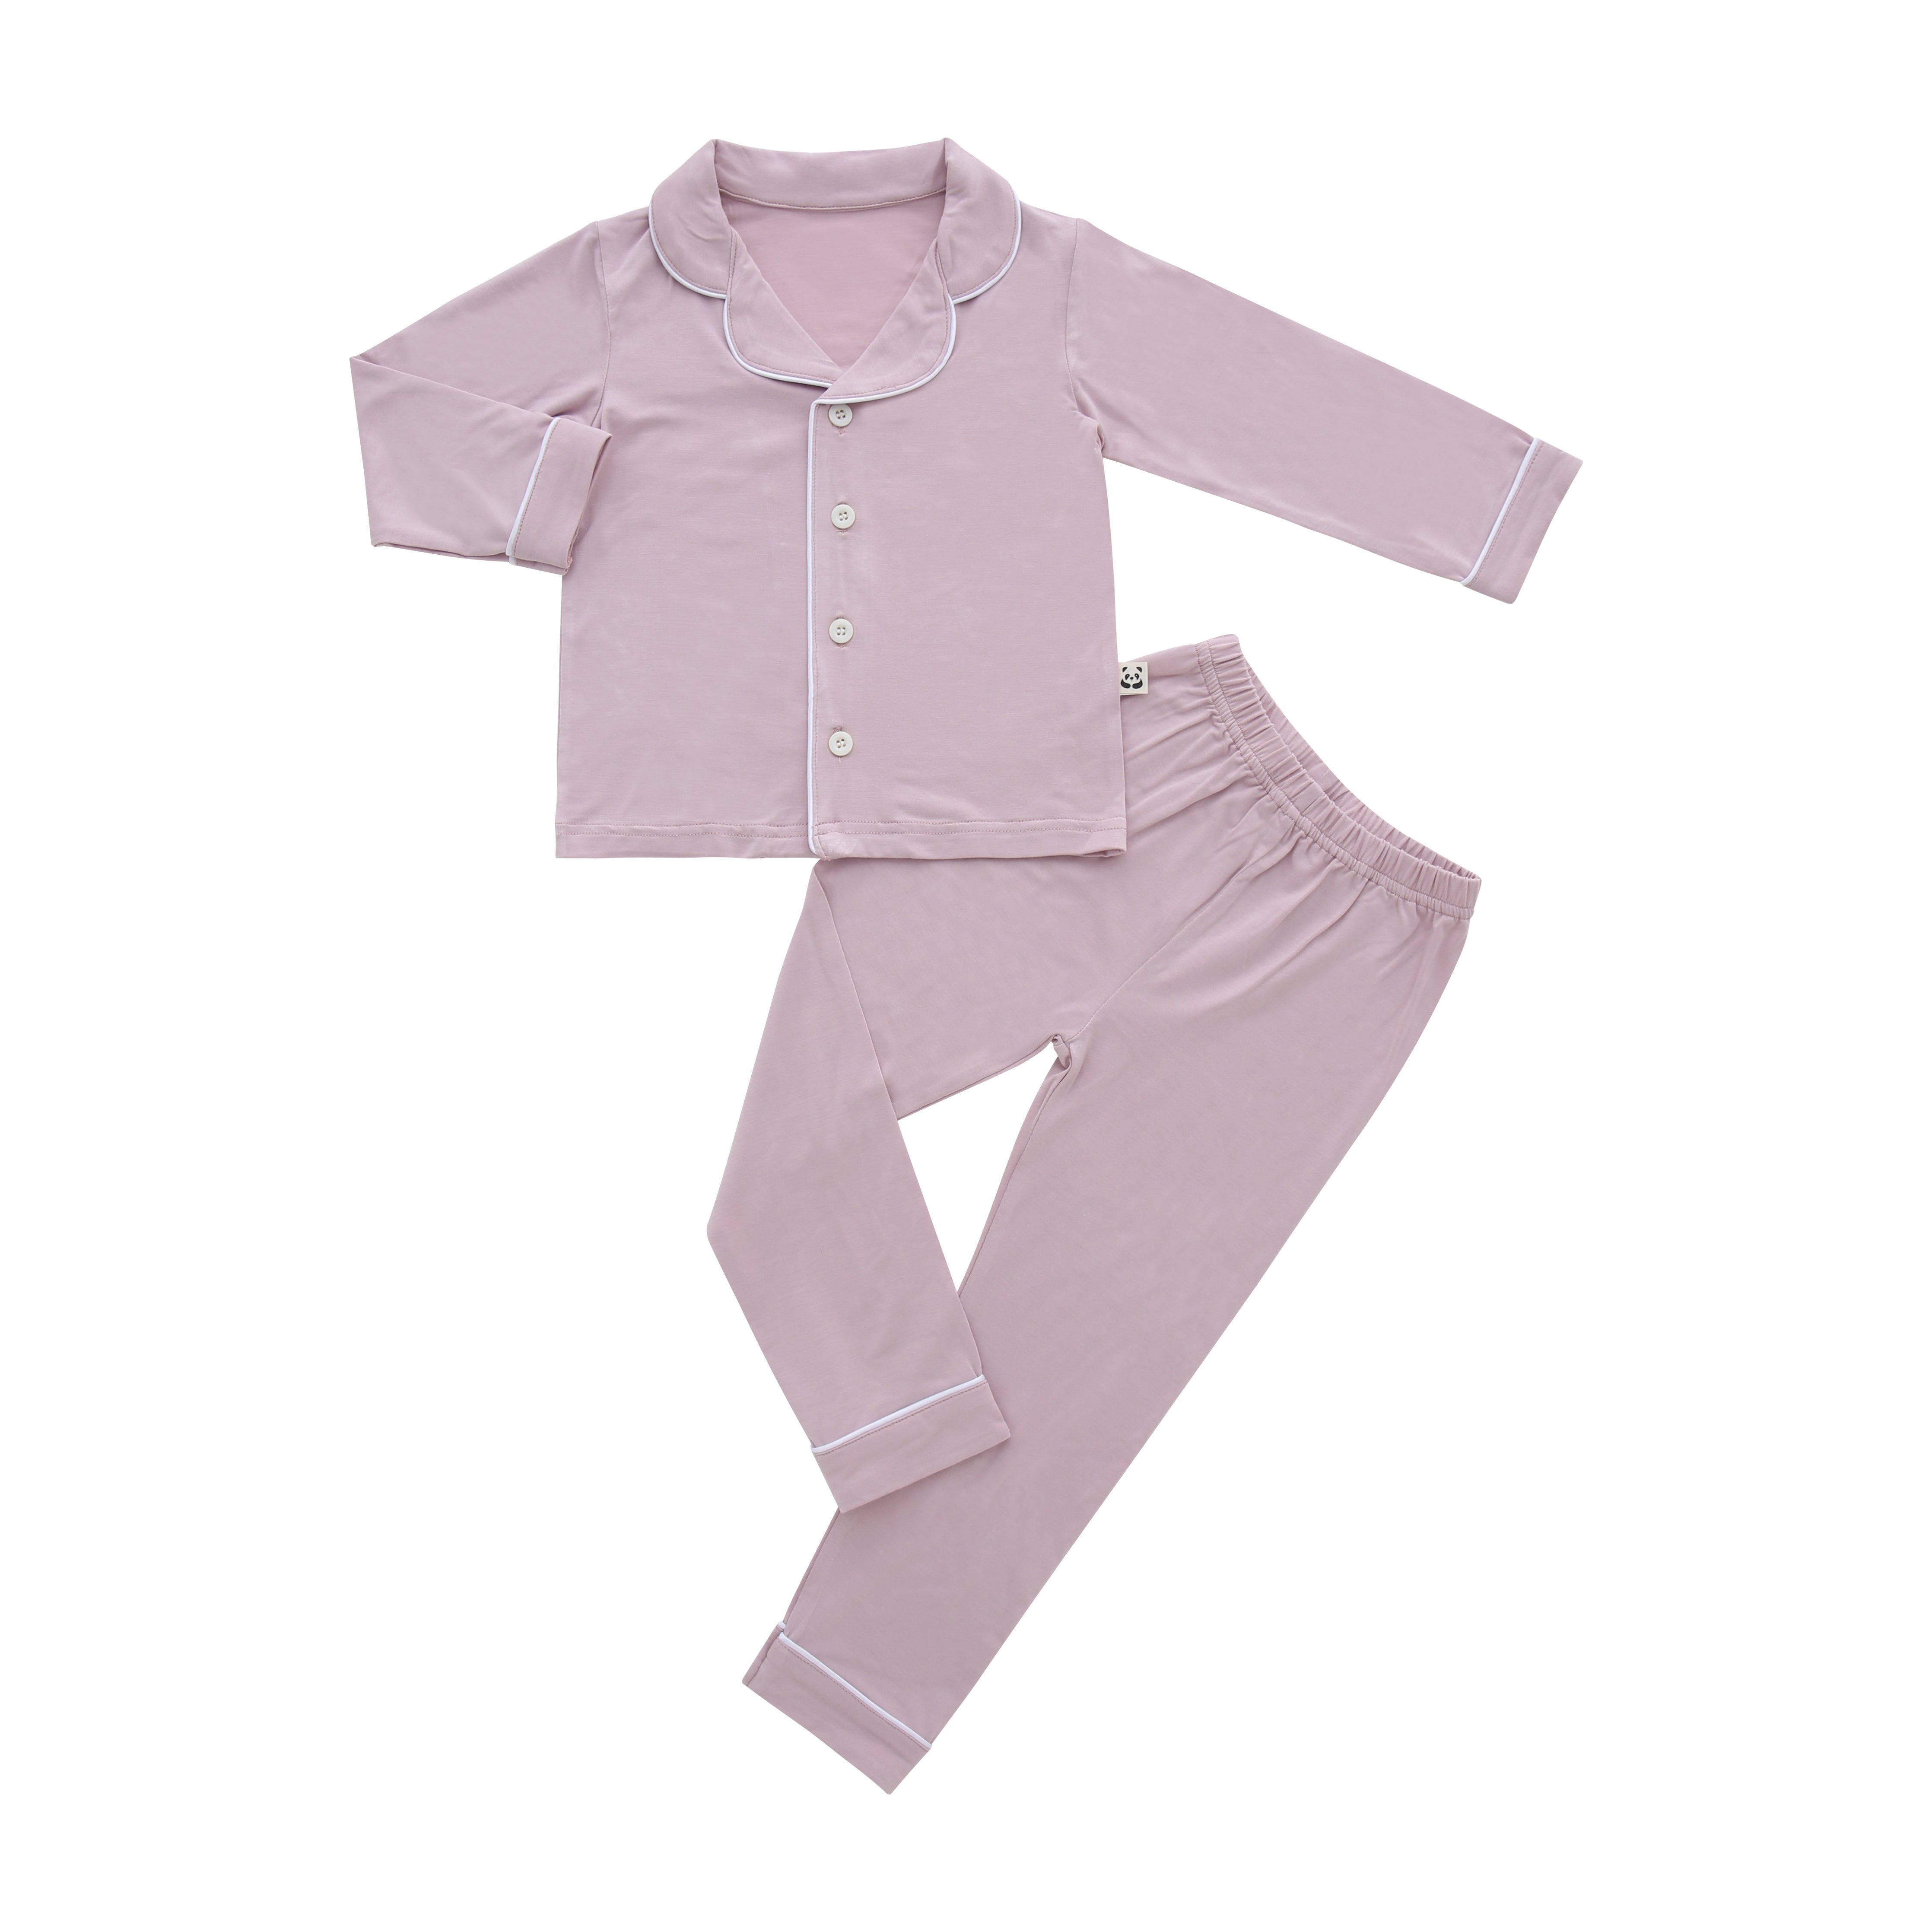 Long Sleeves Button Down PJ Set, Burnished Lilac